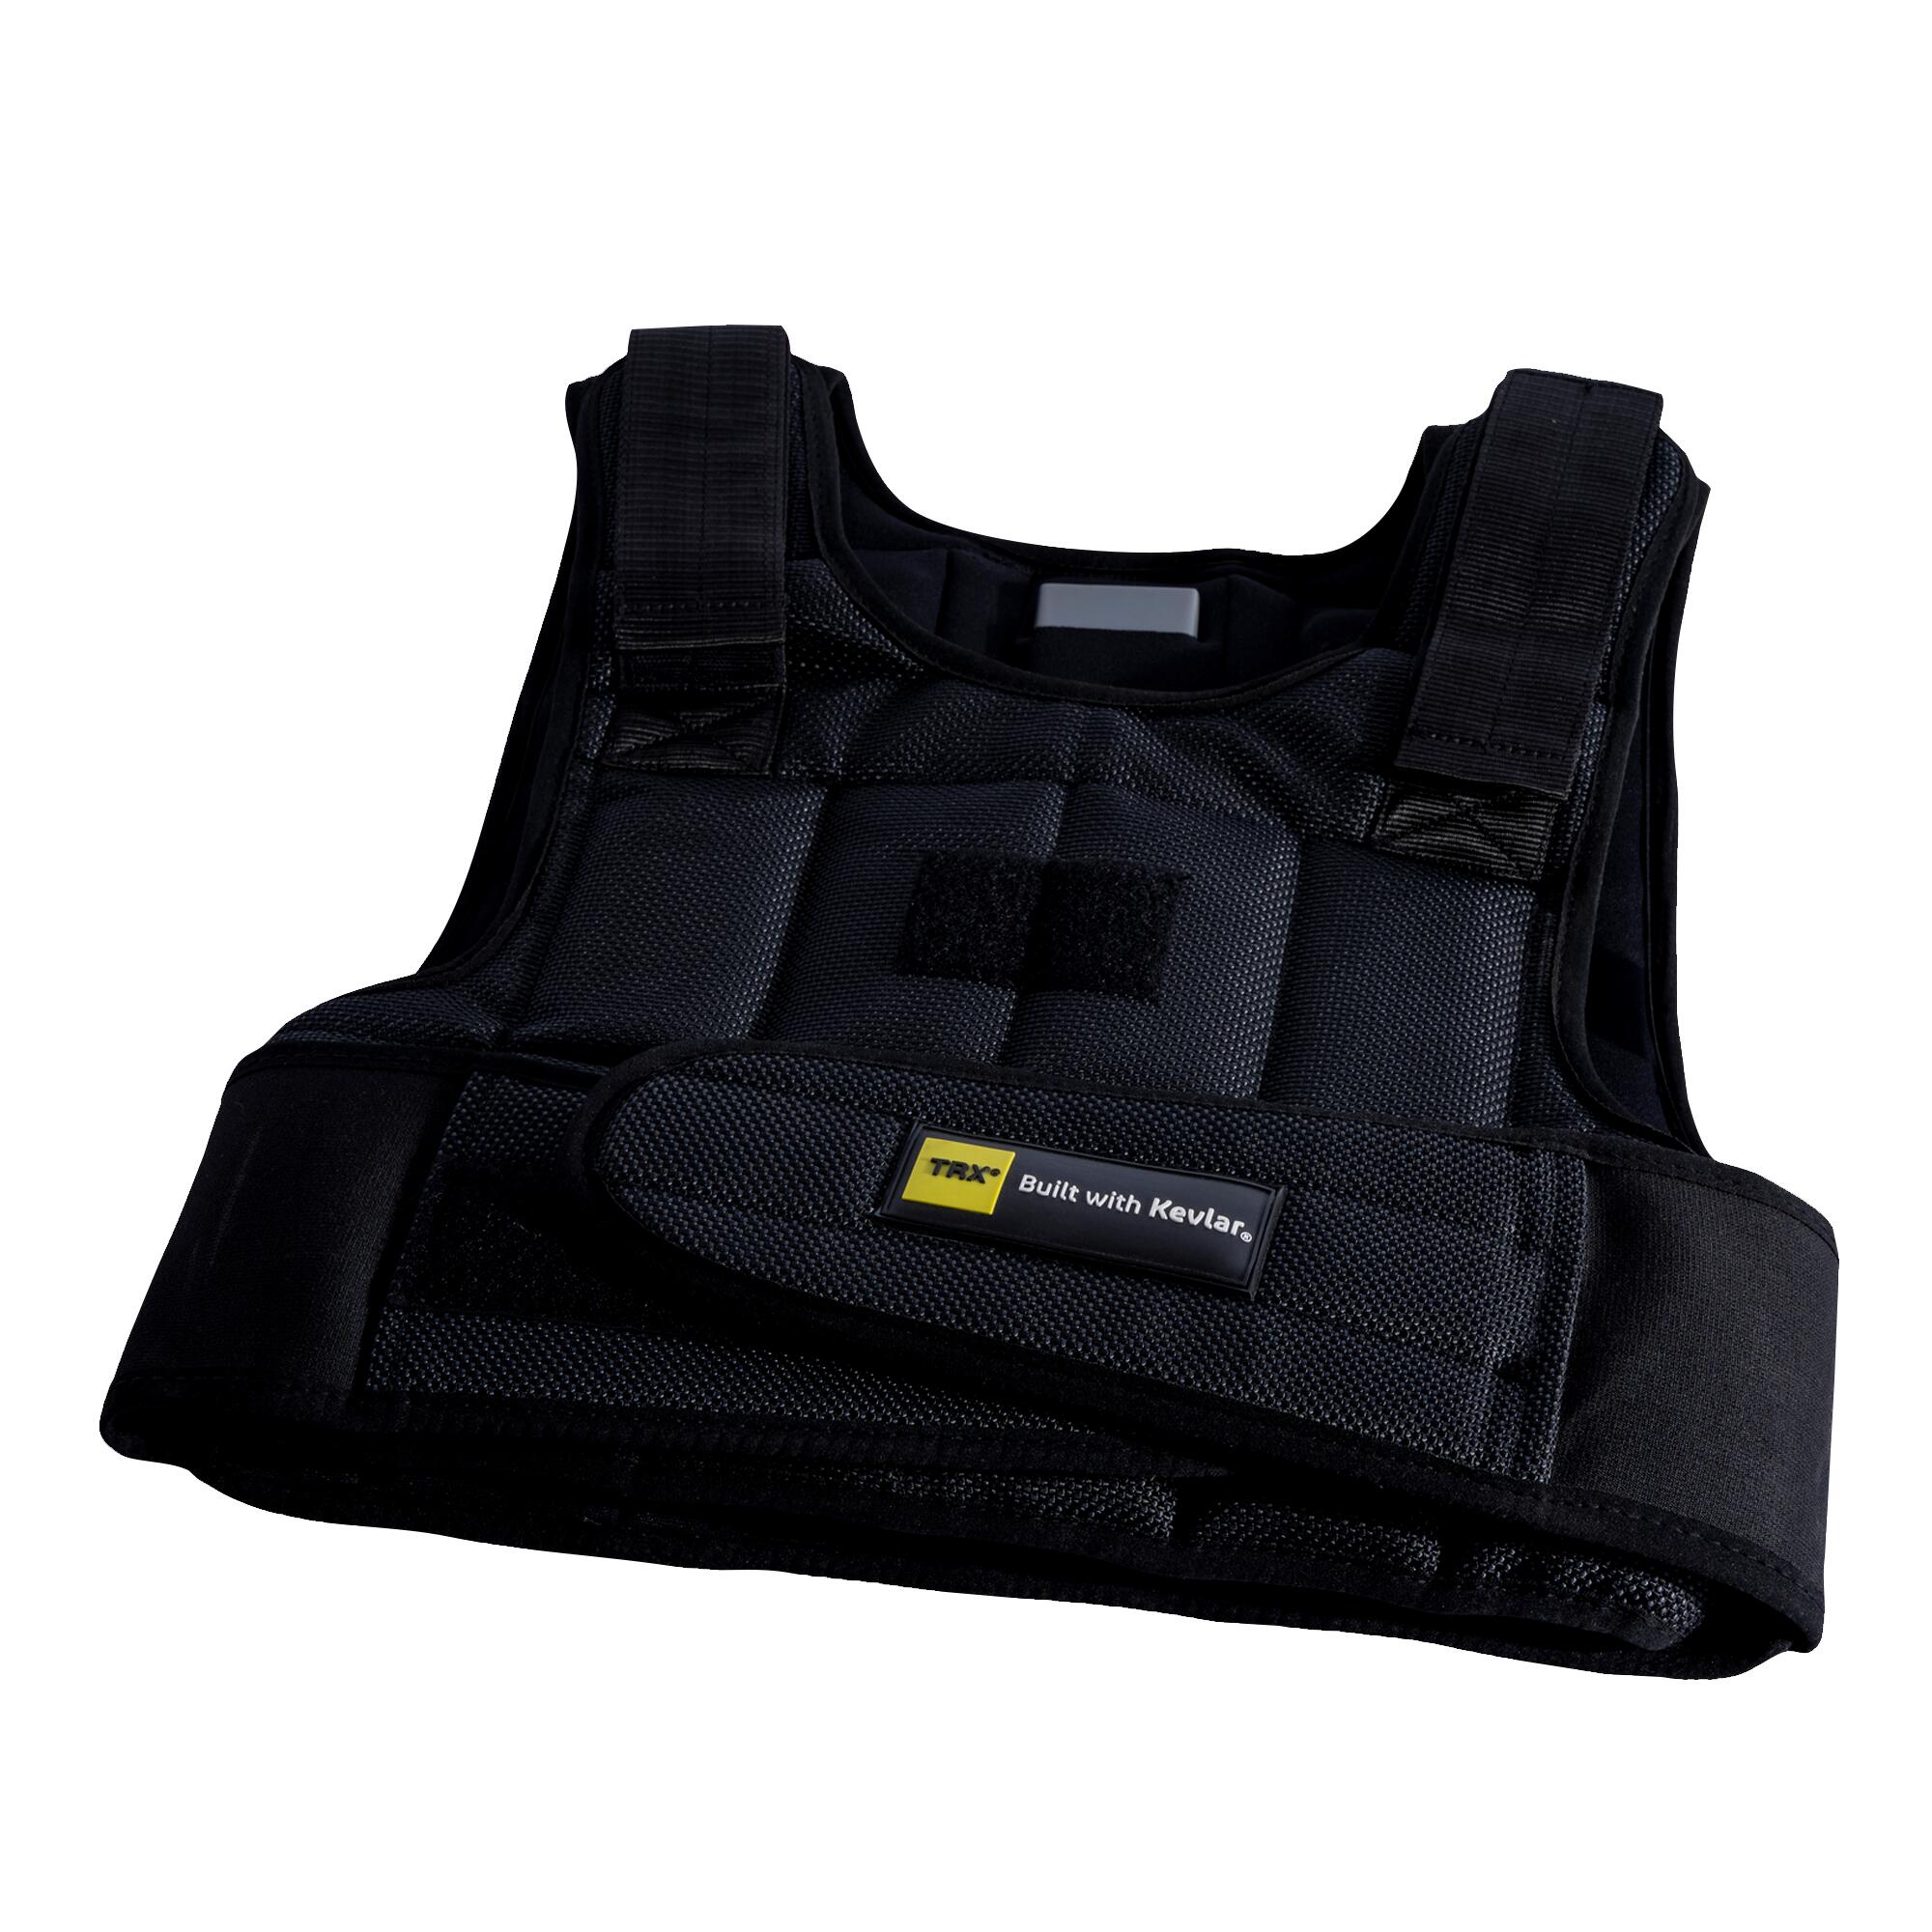 TRX TRX Weighted Vest 20lbs